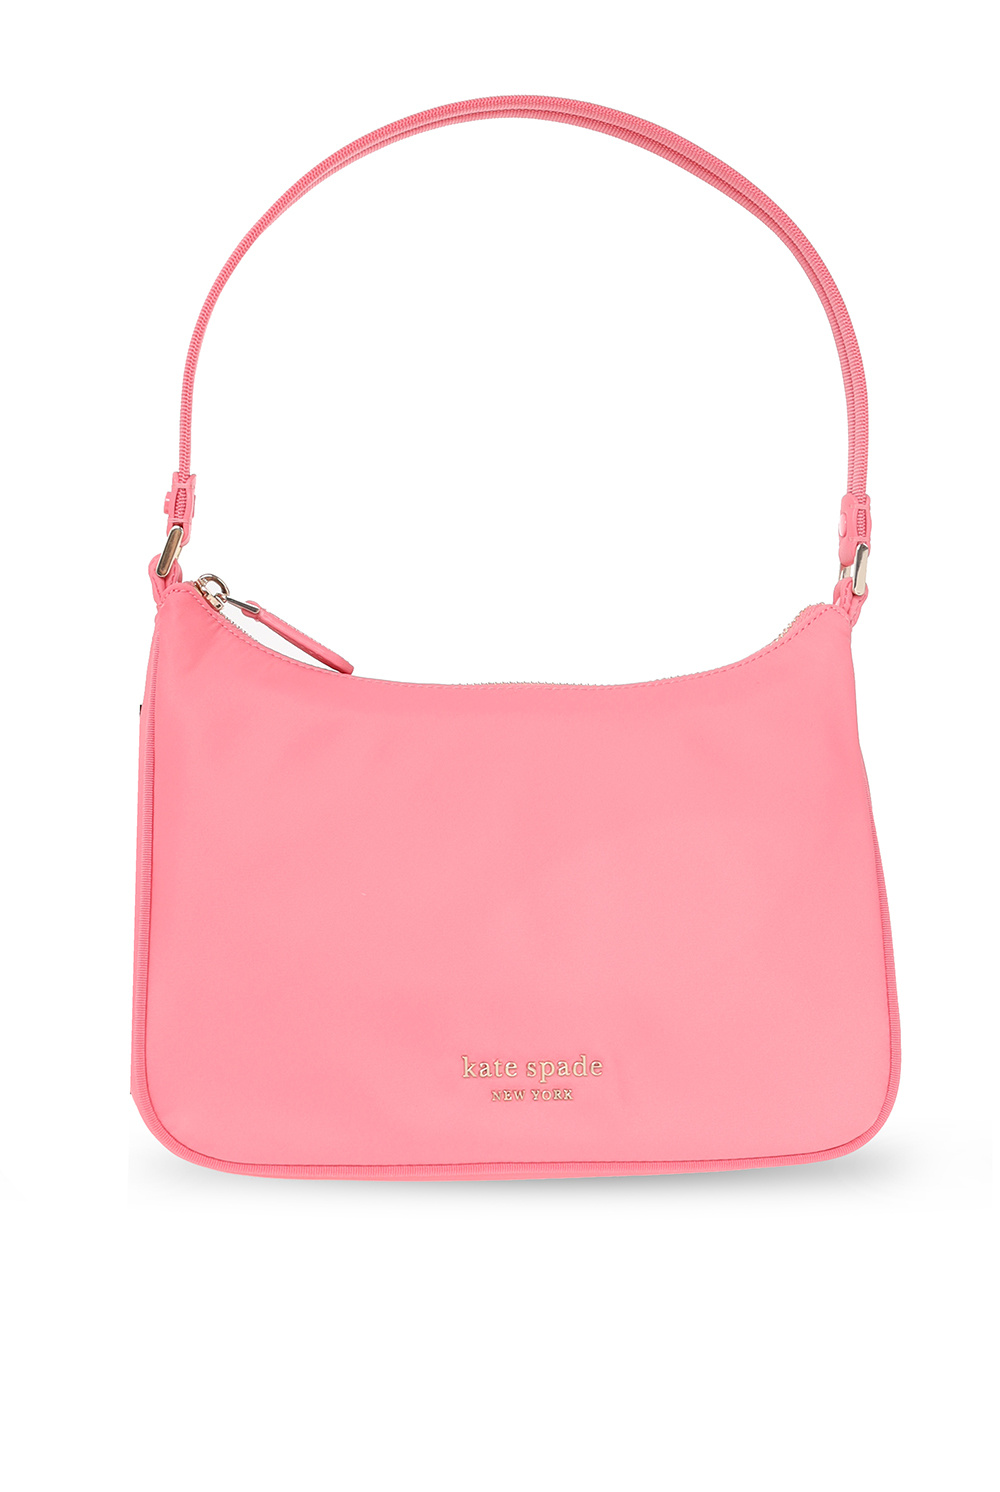 Kate spade Penny Small Hobo Bag Crossbody Coral Gable Pink Leather – Gaby's  Bags